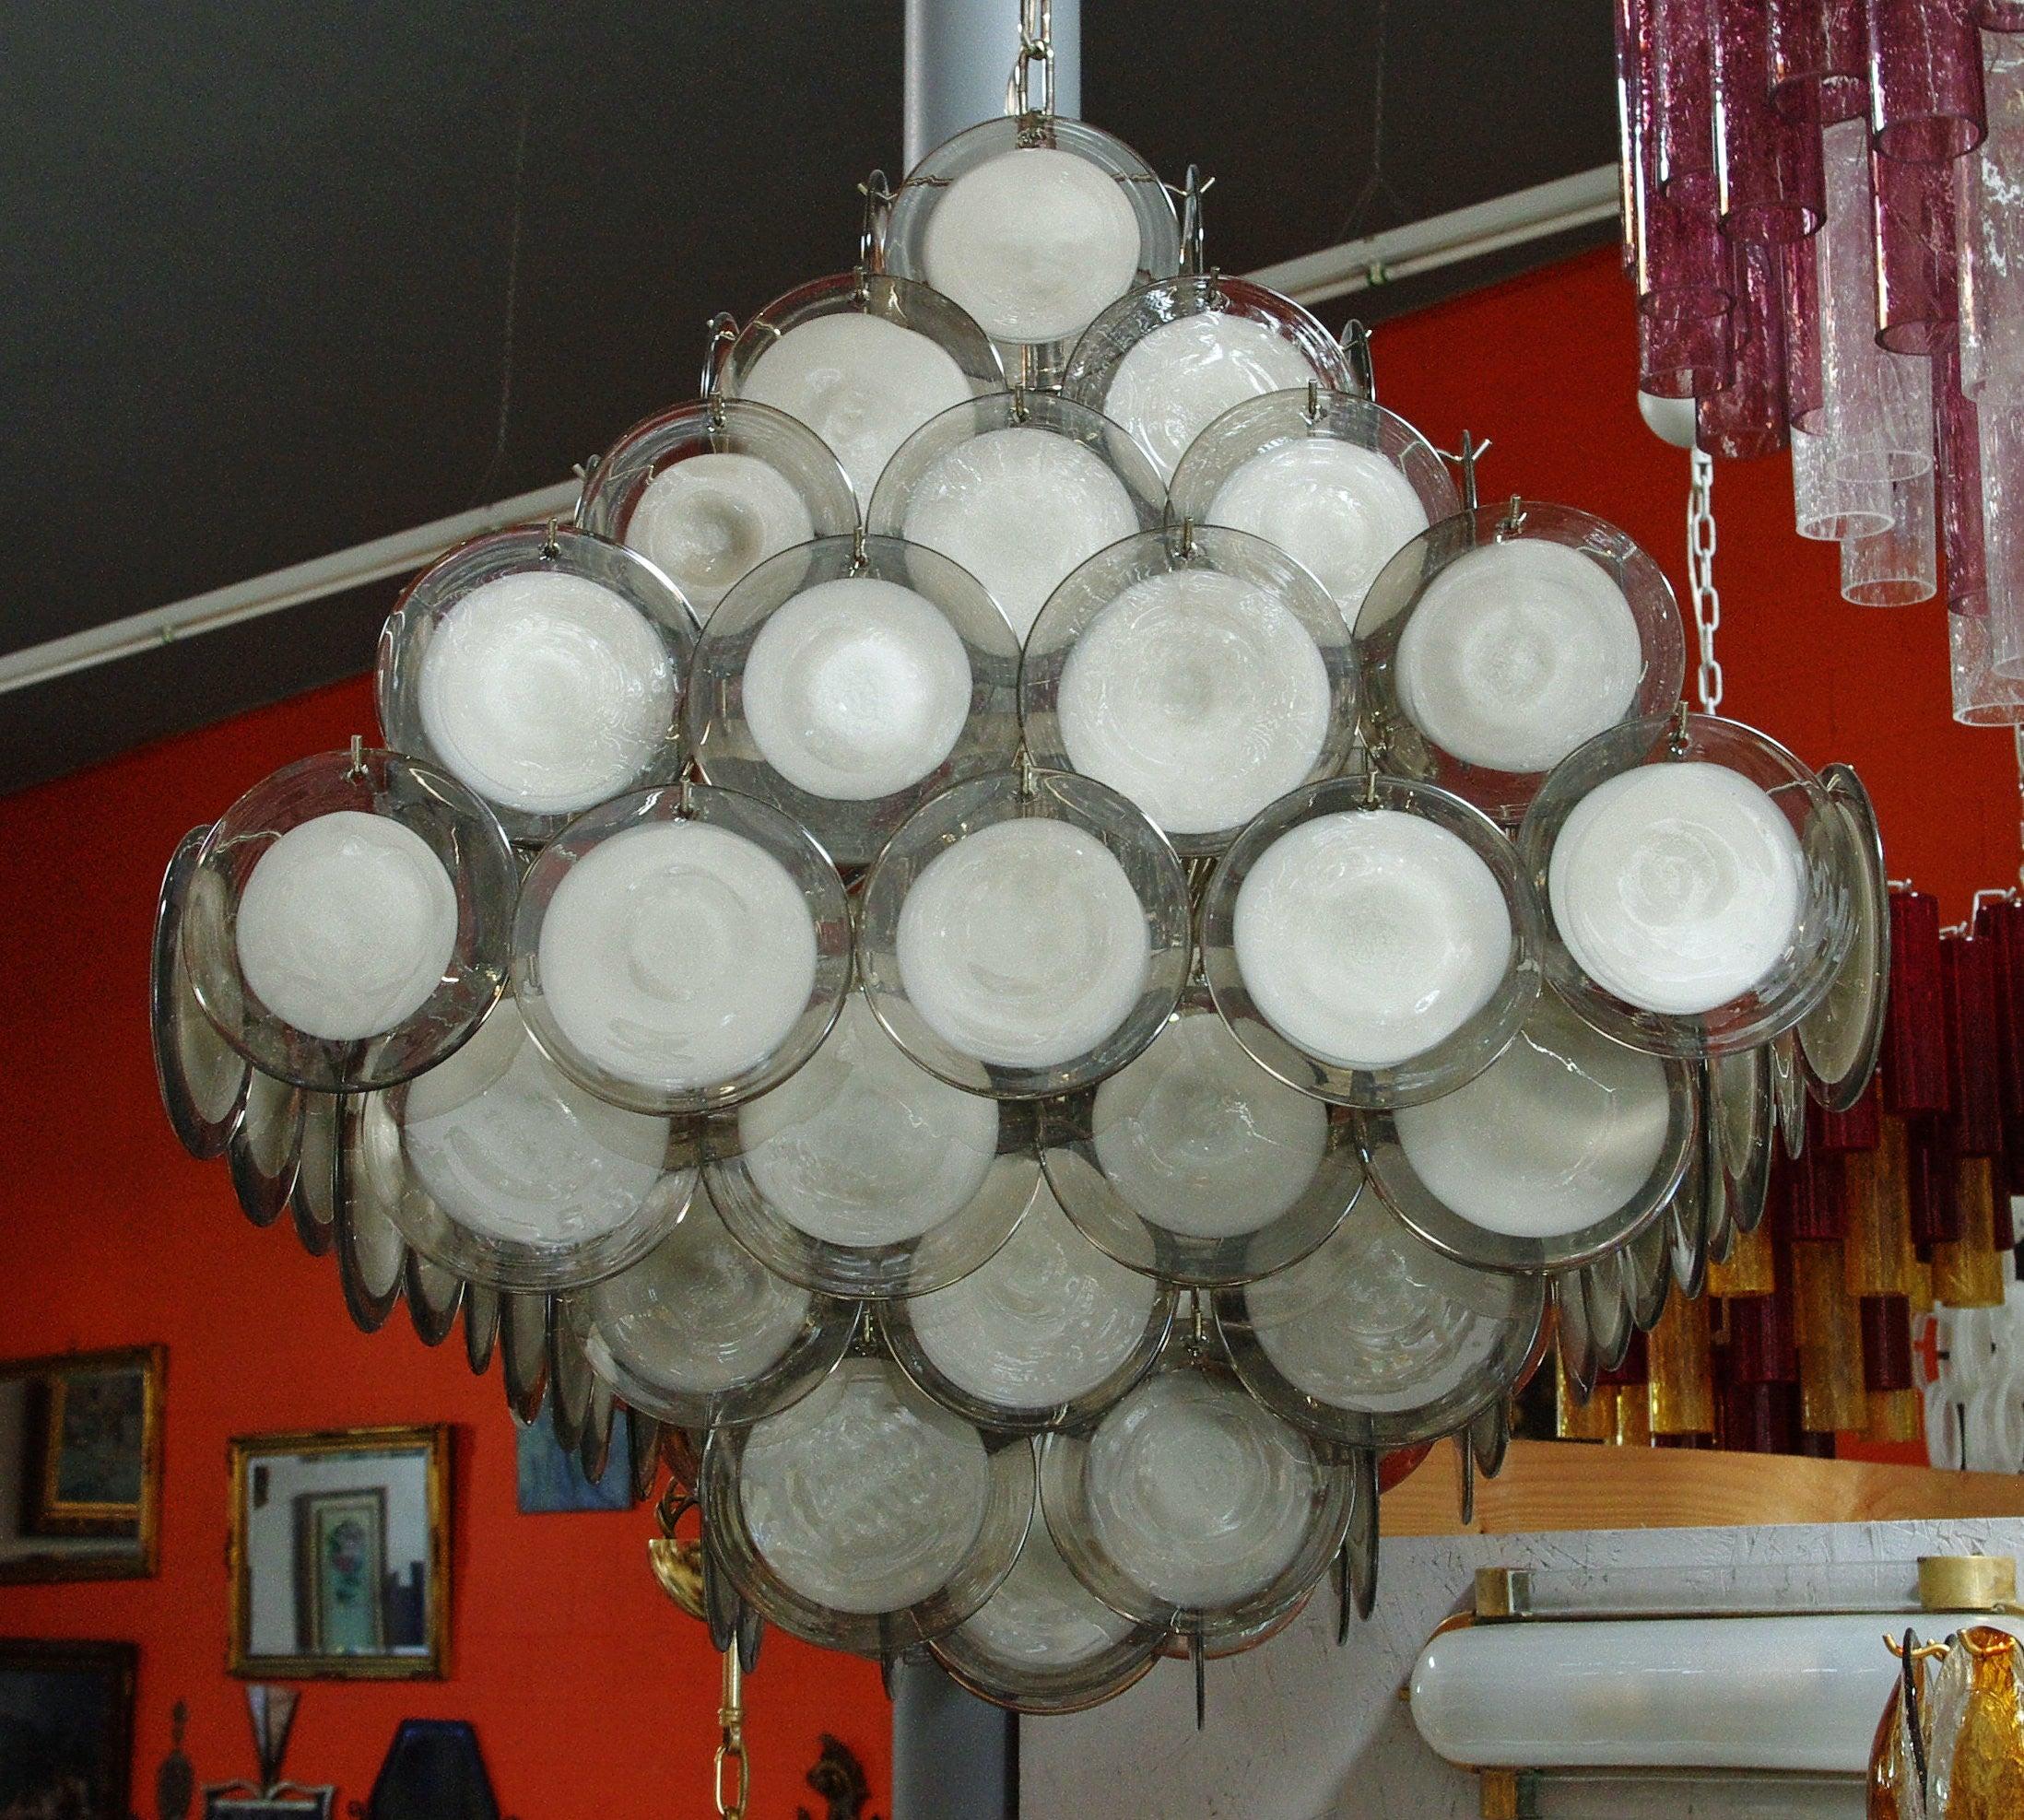 Italian chandelier with smoky and white infused Murano glass discs mounted on chrome frame by Fabio Ltd, made in Italy
12-light / E26 or E27 type / max 60W each
Measures: Length 30 inches, width 30 inches, height 30 inches plus chain and